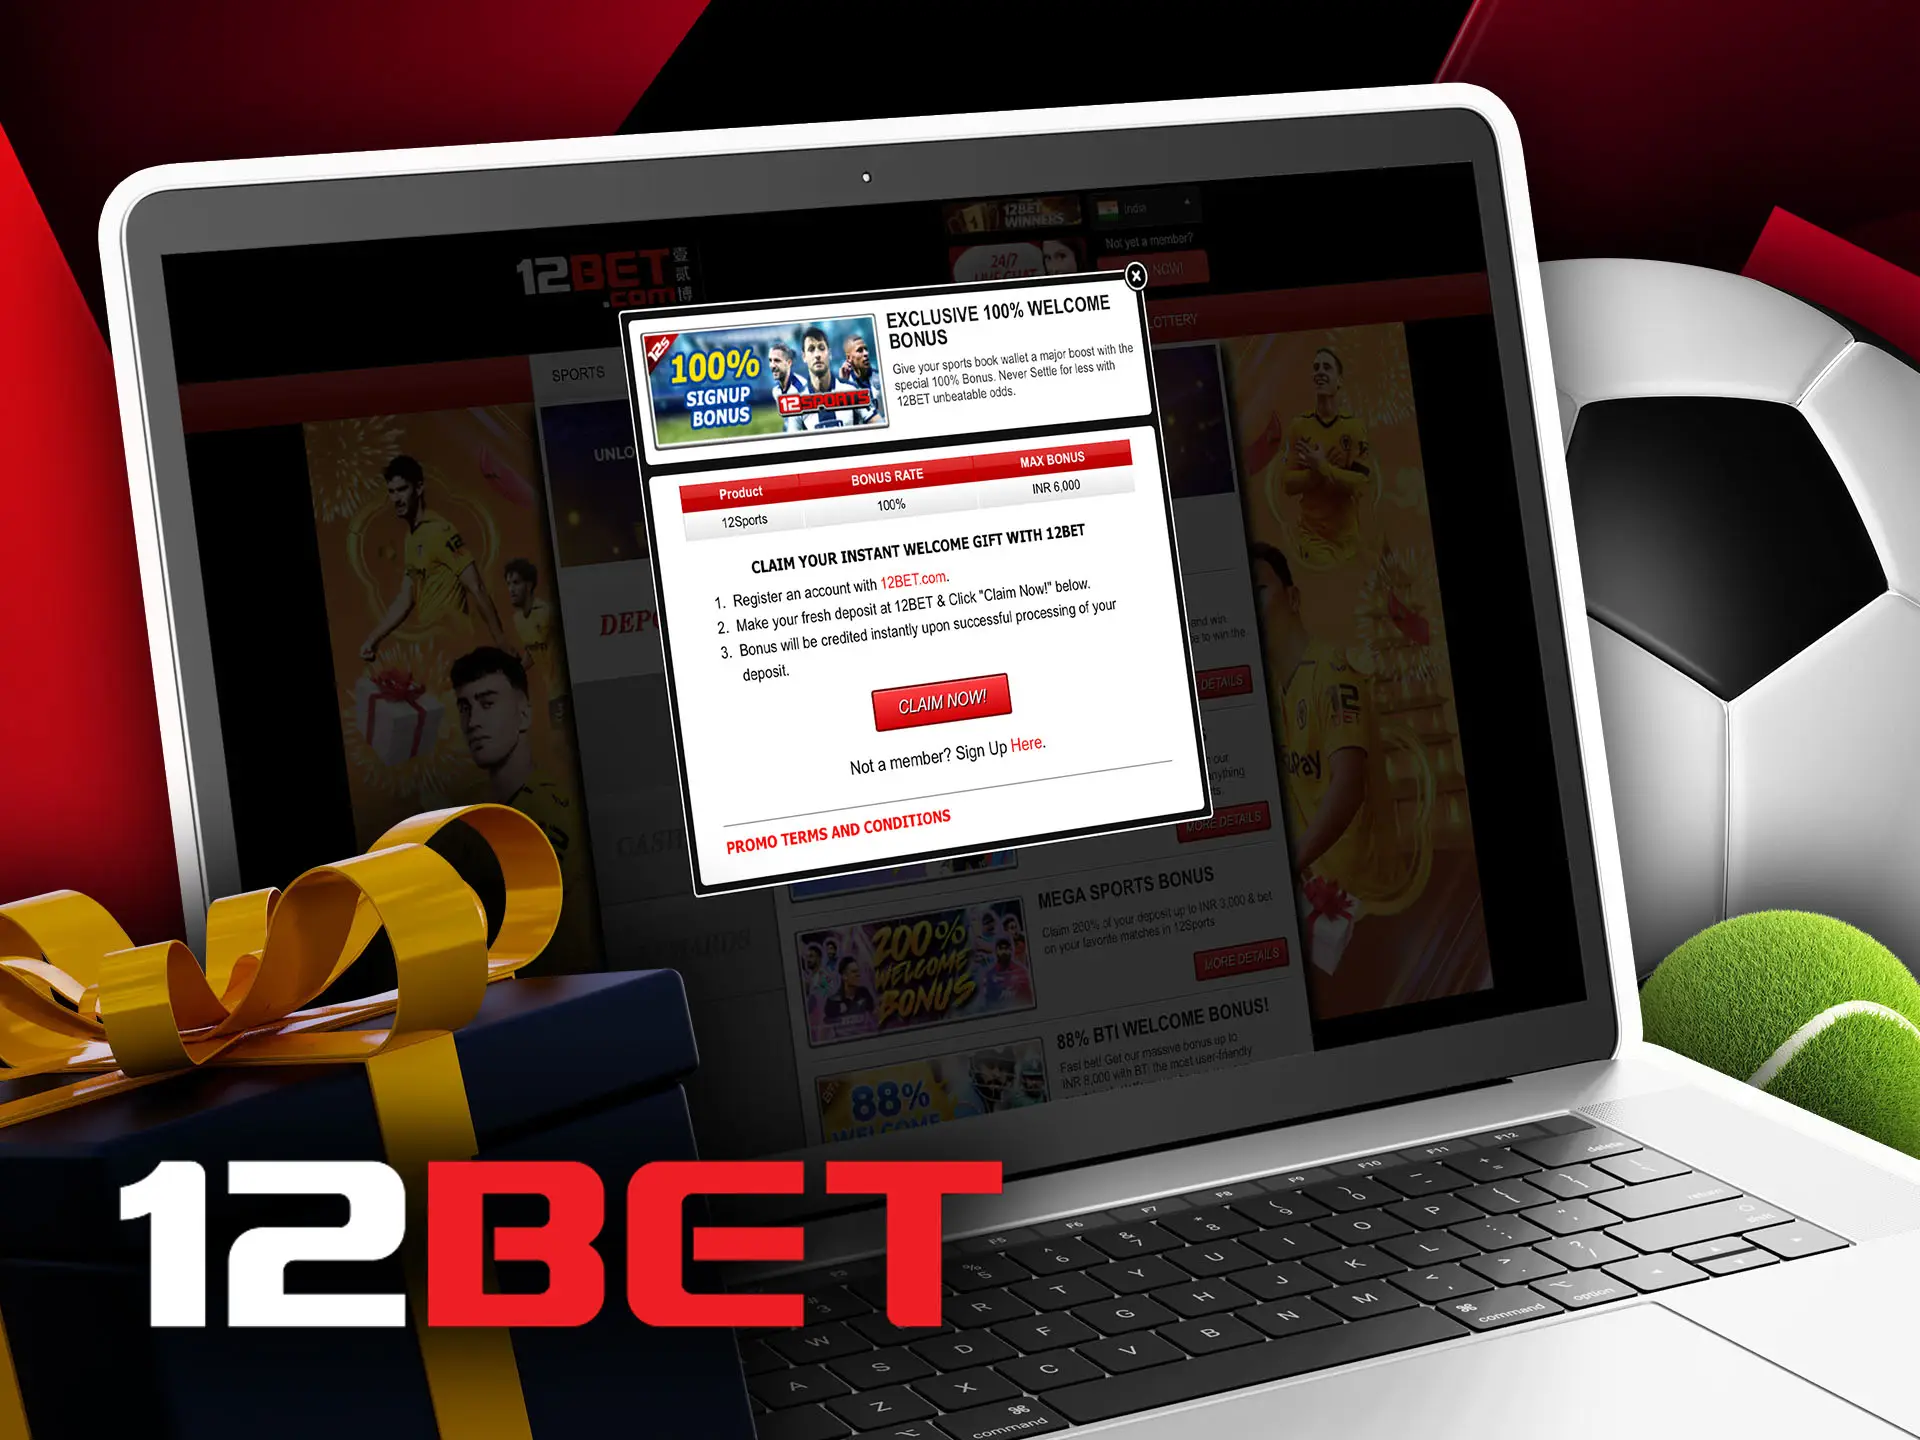 Make bets on sports and get your 12bet sports bonus.